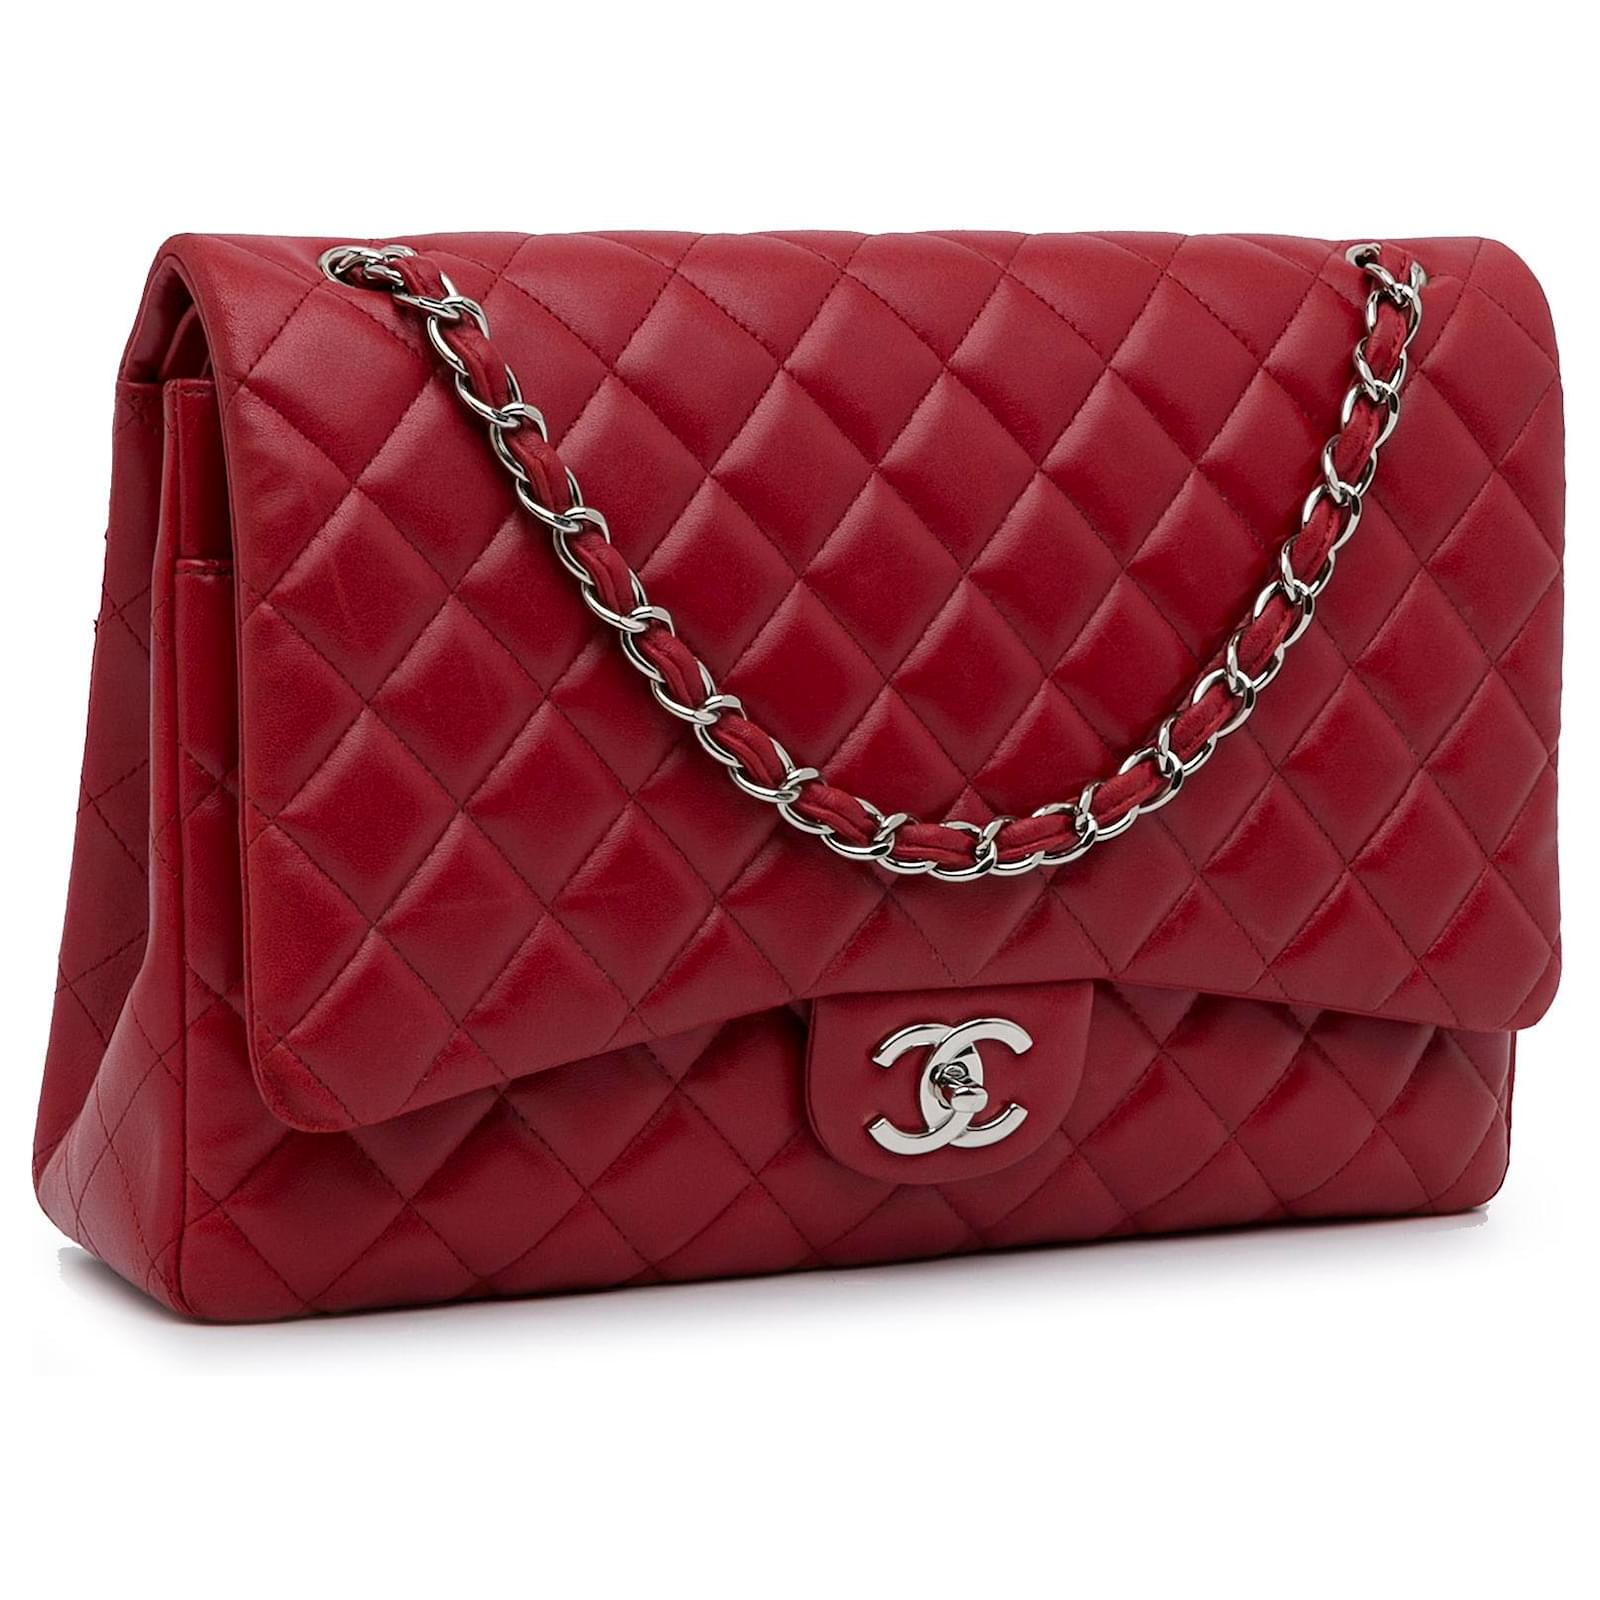 Chanel Calf Skin Quilted Caviar Leather Classic Maxi 33cm Flap Bag Red Color